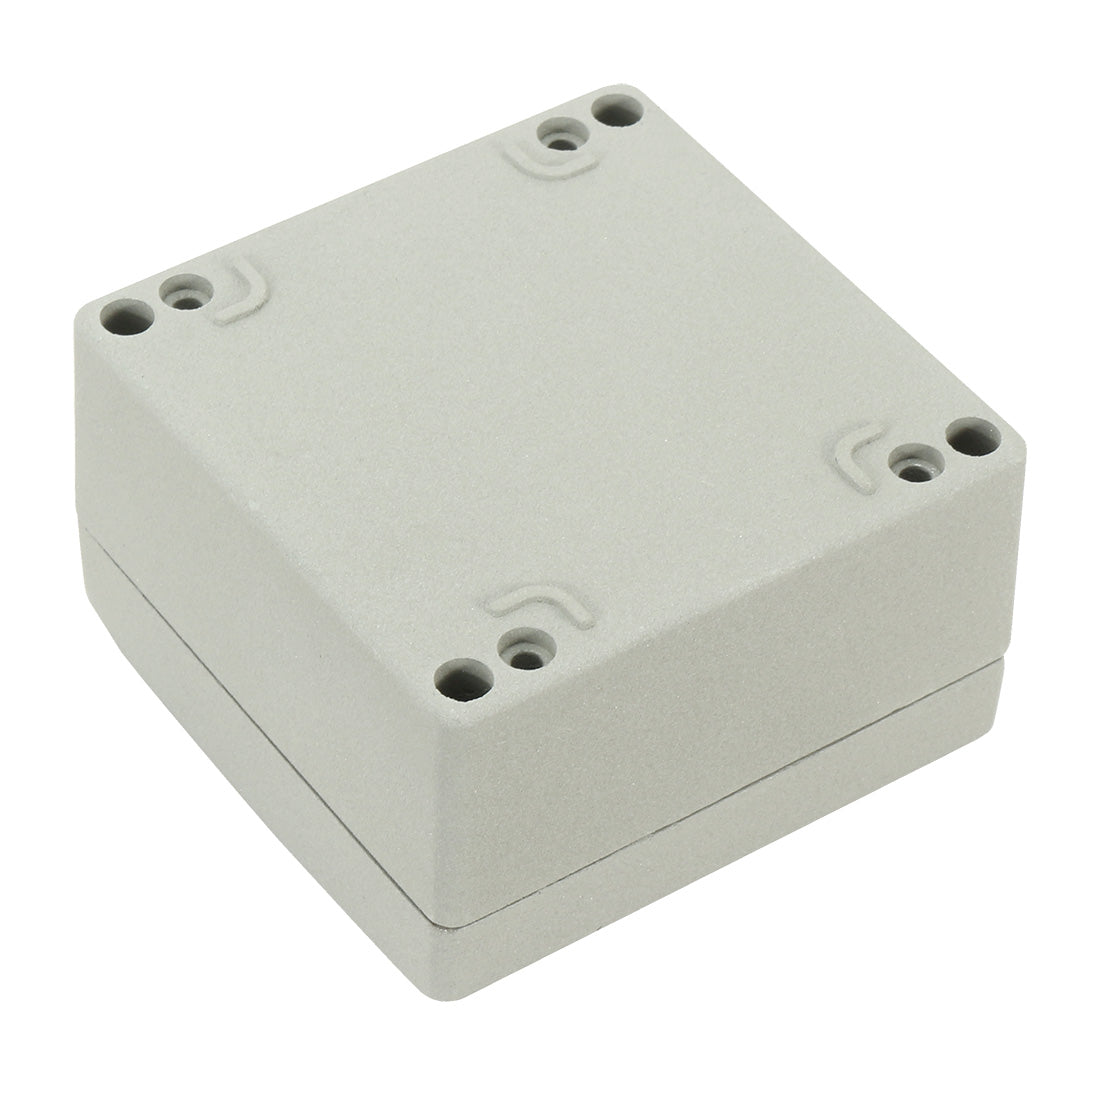 uxcell Uxcell 3.9"x3.9"x2.3"(100mmx100mmx60mm) Aluminum Junction Box Universal Electric Project Enclosure w Two Horns